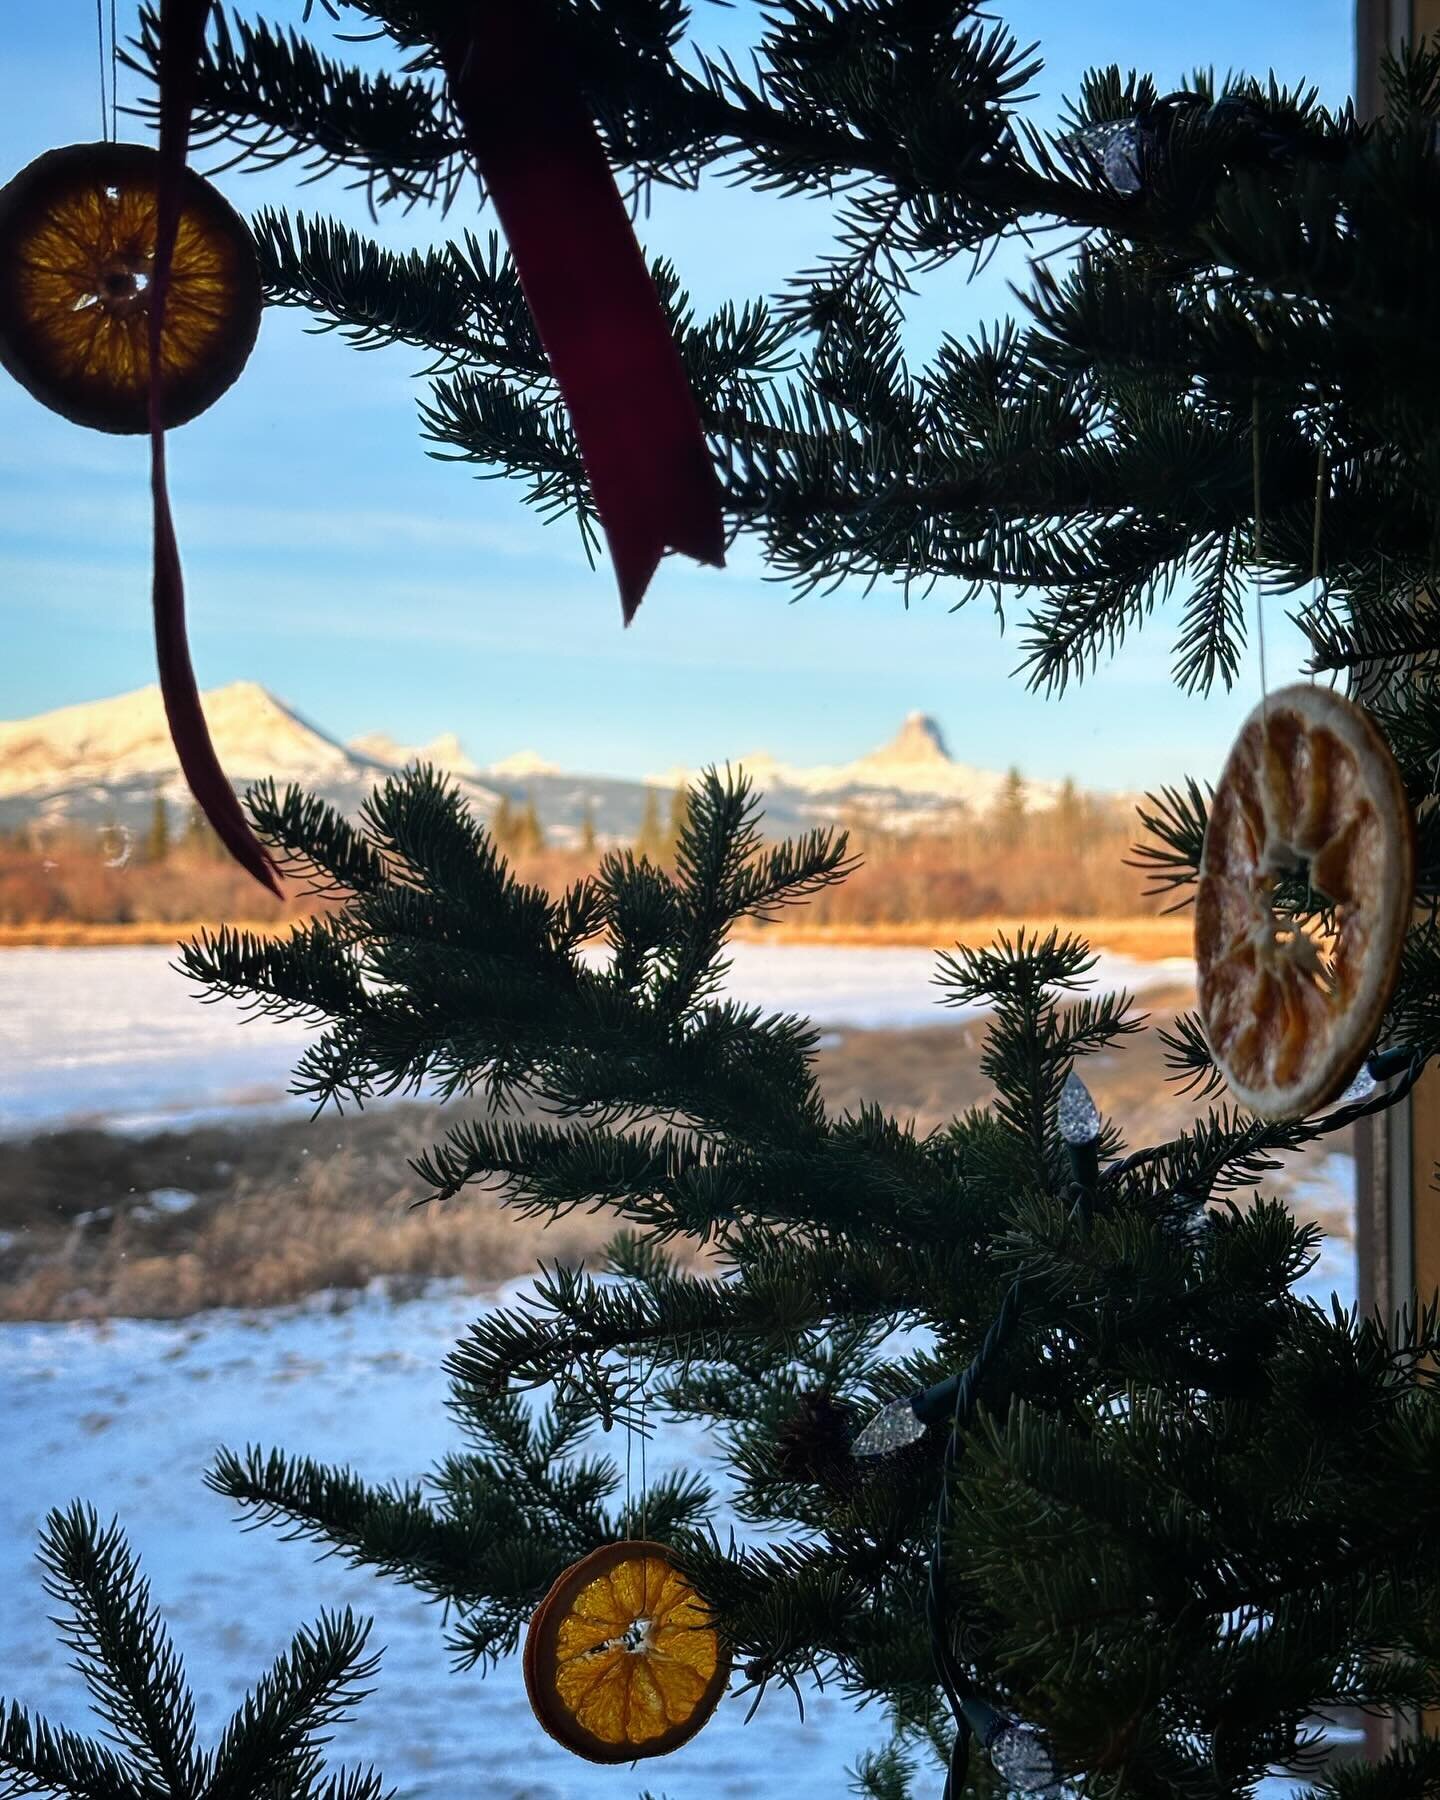 Wishing you a joyful end to 2023! We&rsquo;ve been embracing a mild start to winter by spending extra time with our loved ones and enjoying easy winter access to #glaciernps.